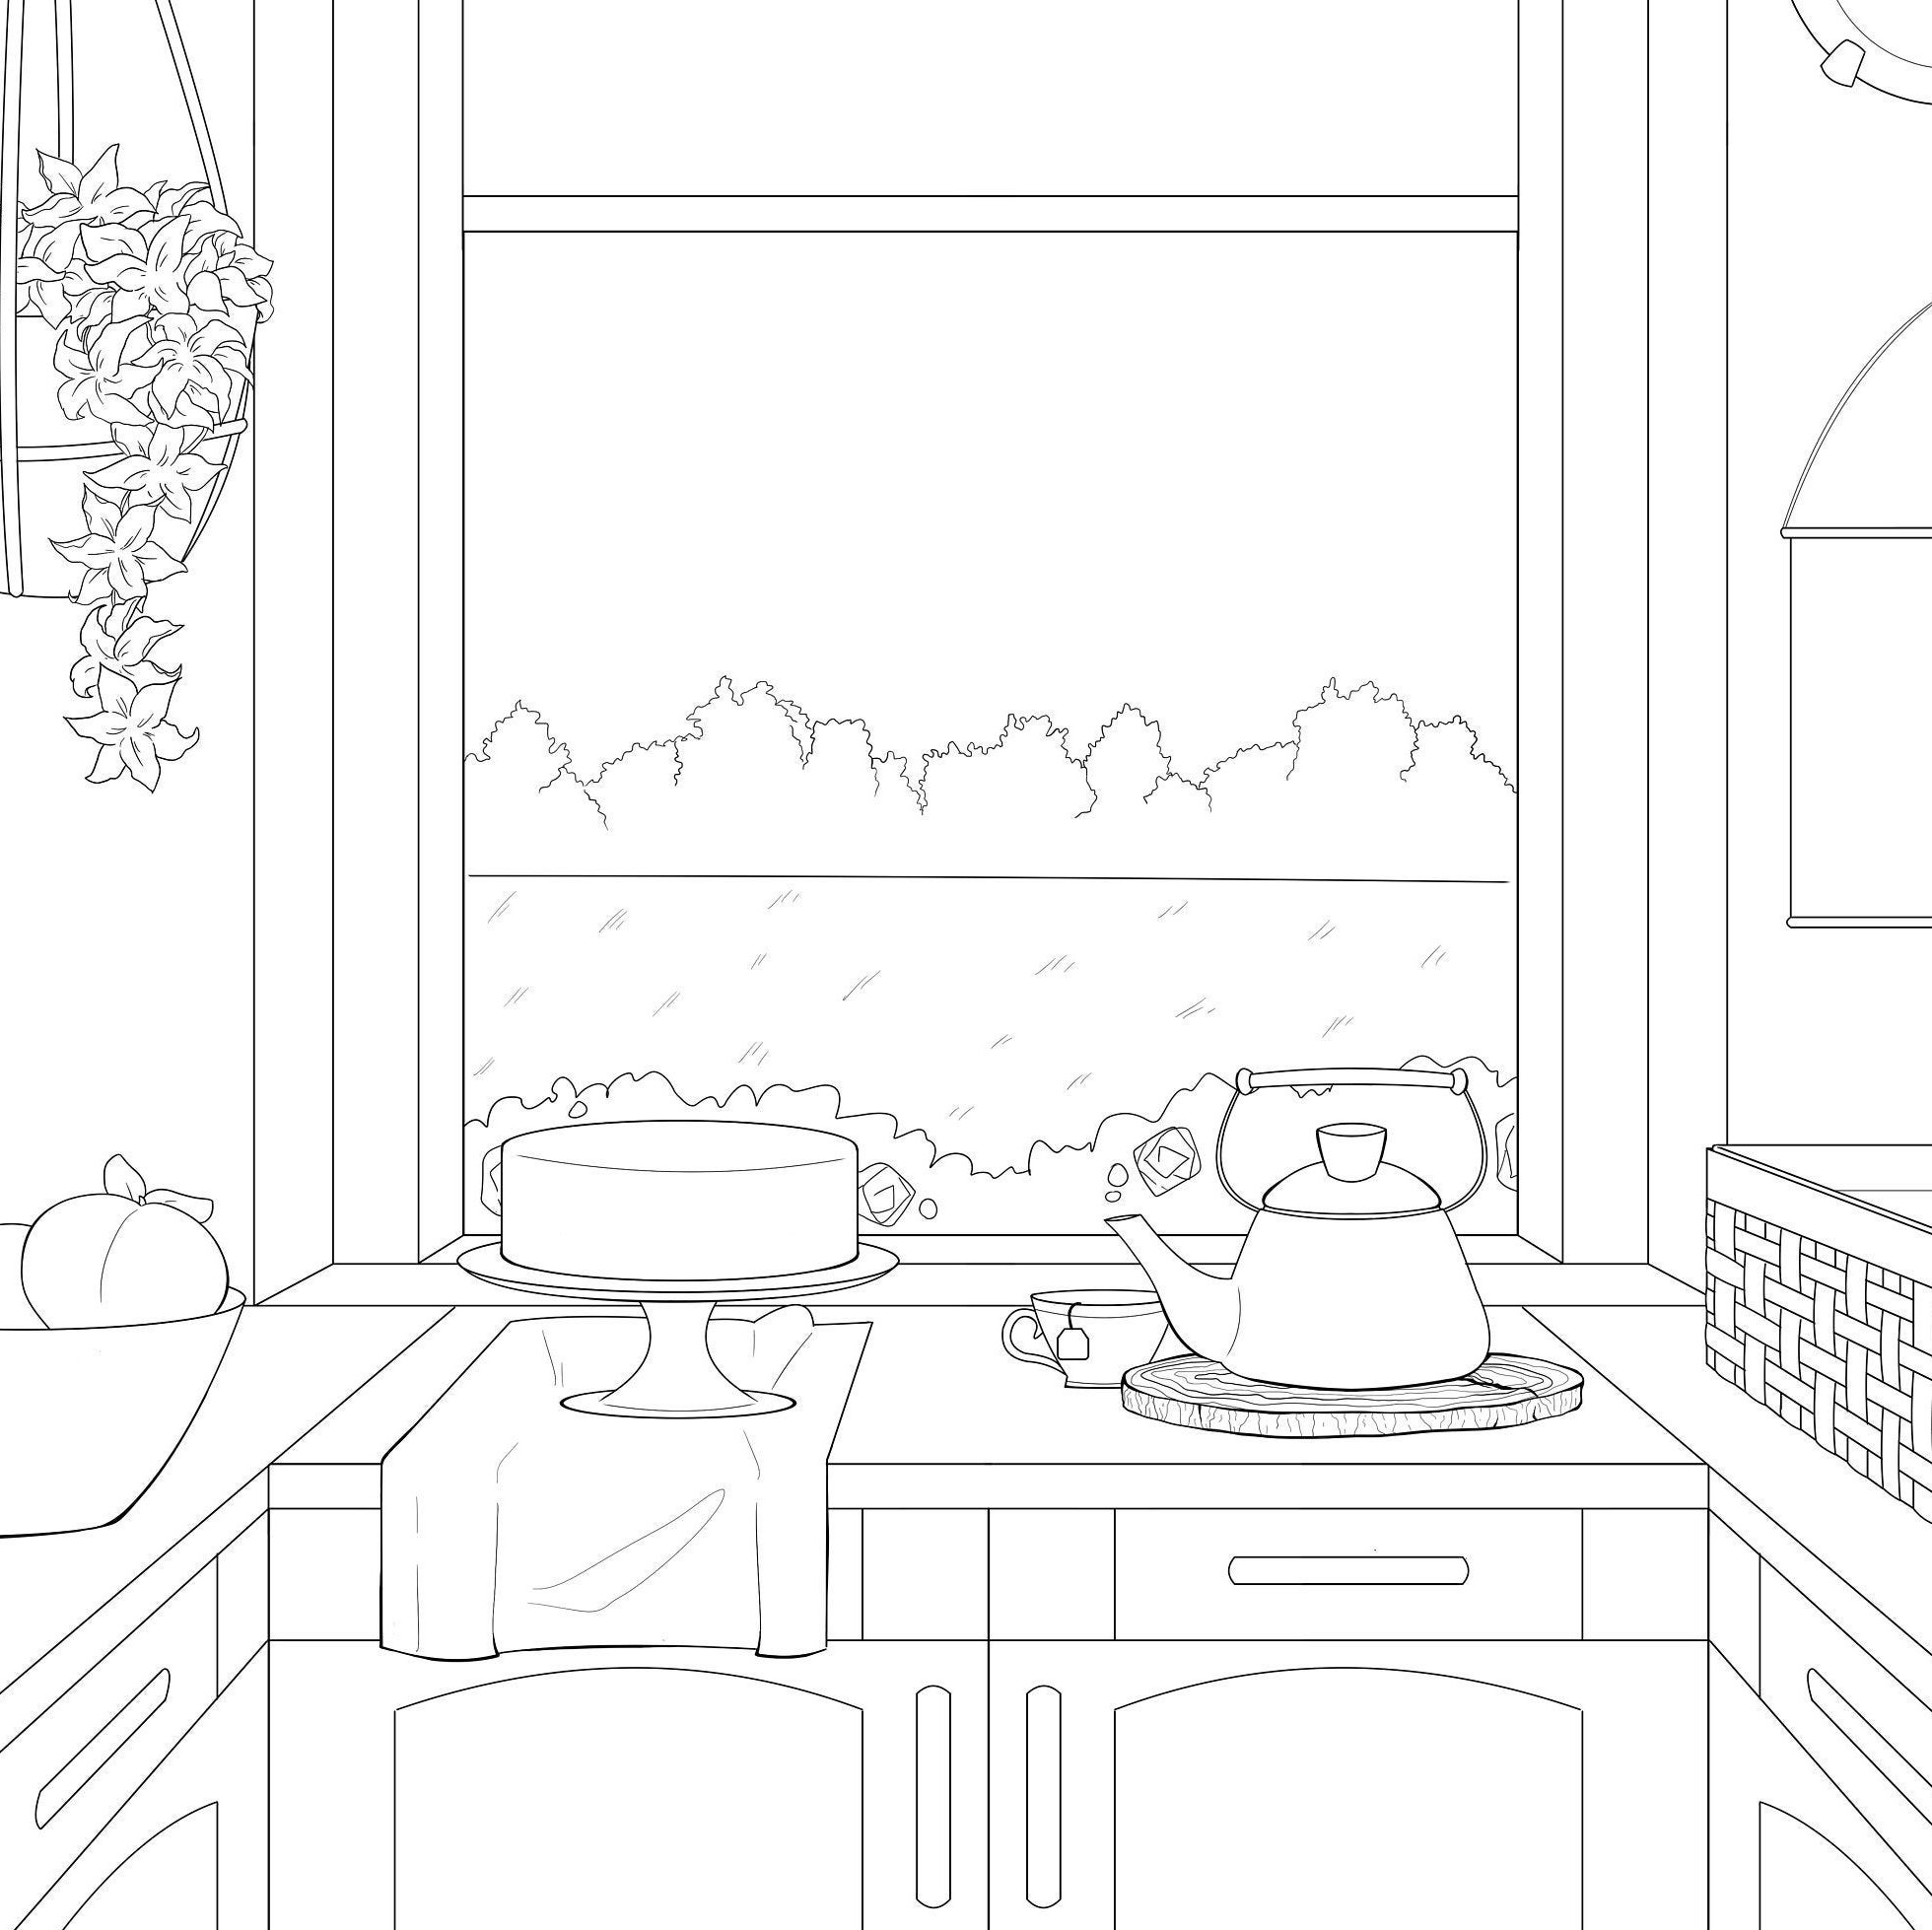 Cottagecore Coloring Pages, Mini Coloring Books, Print on Demand